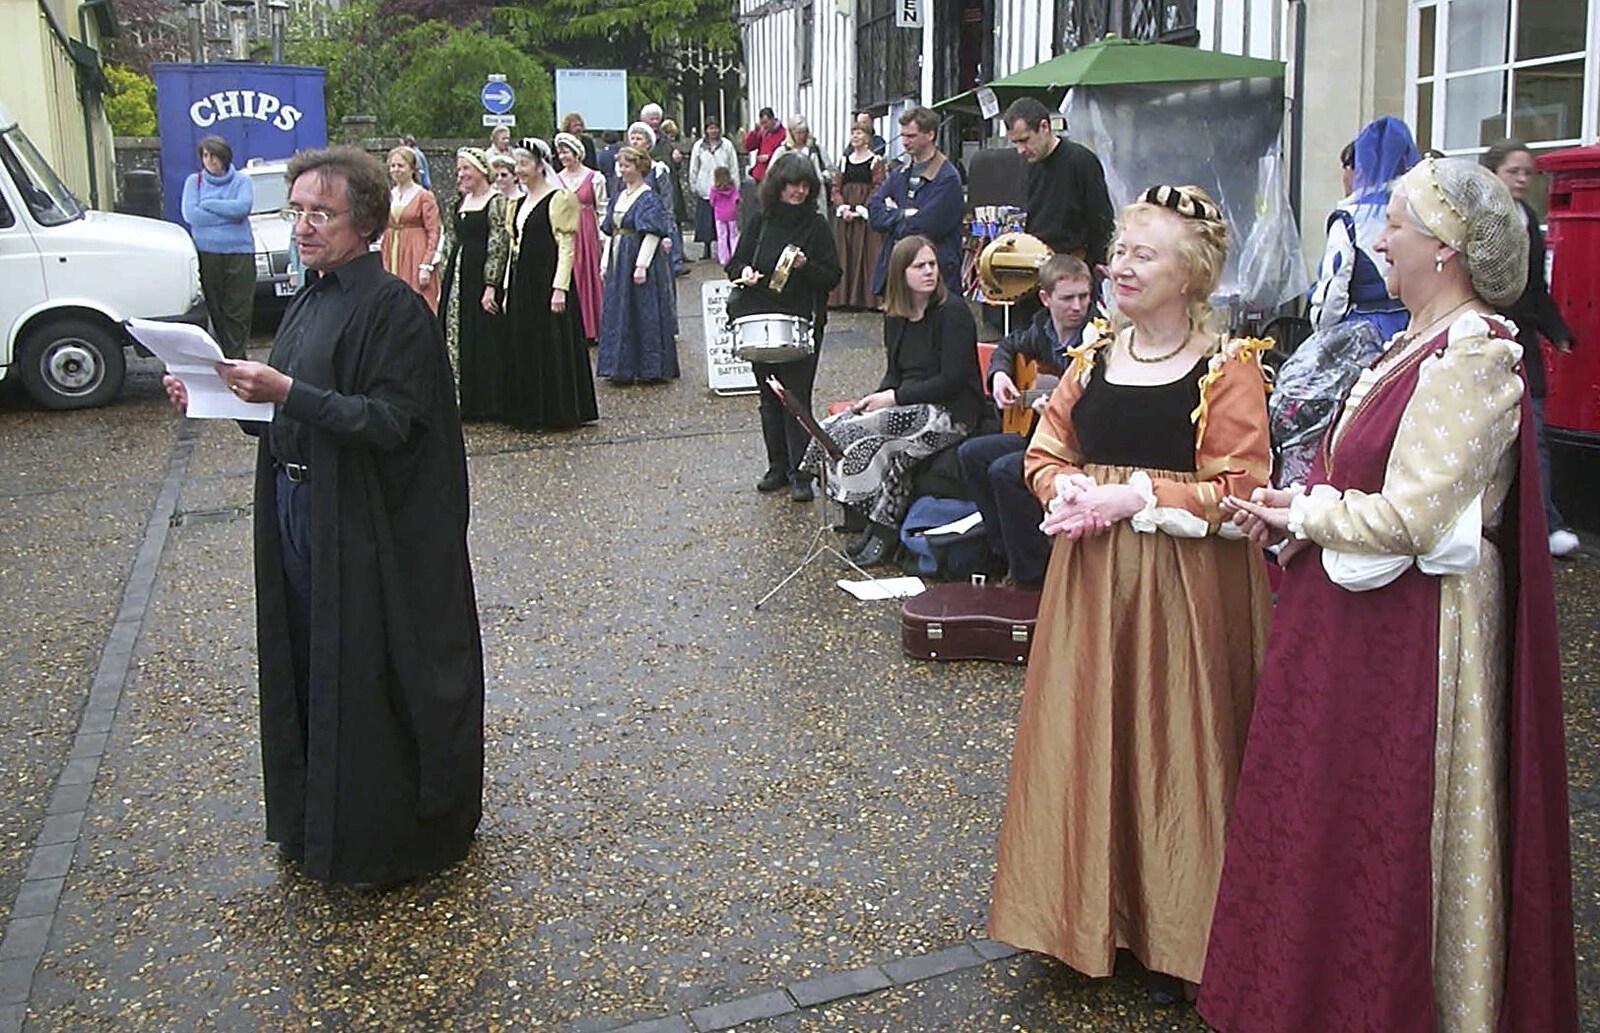 An announcement is made from Badminton Sprogs and The Skelton Festival, Diss, Norfolk - 1st May 2004